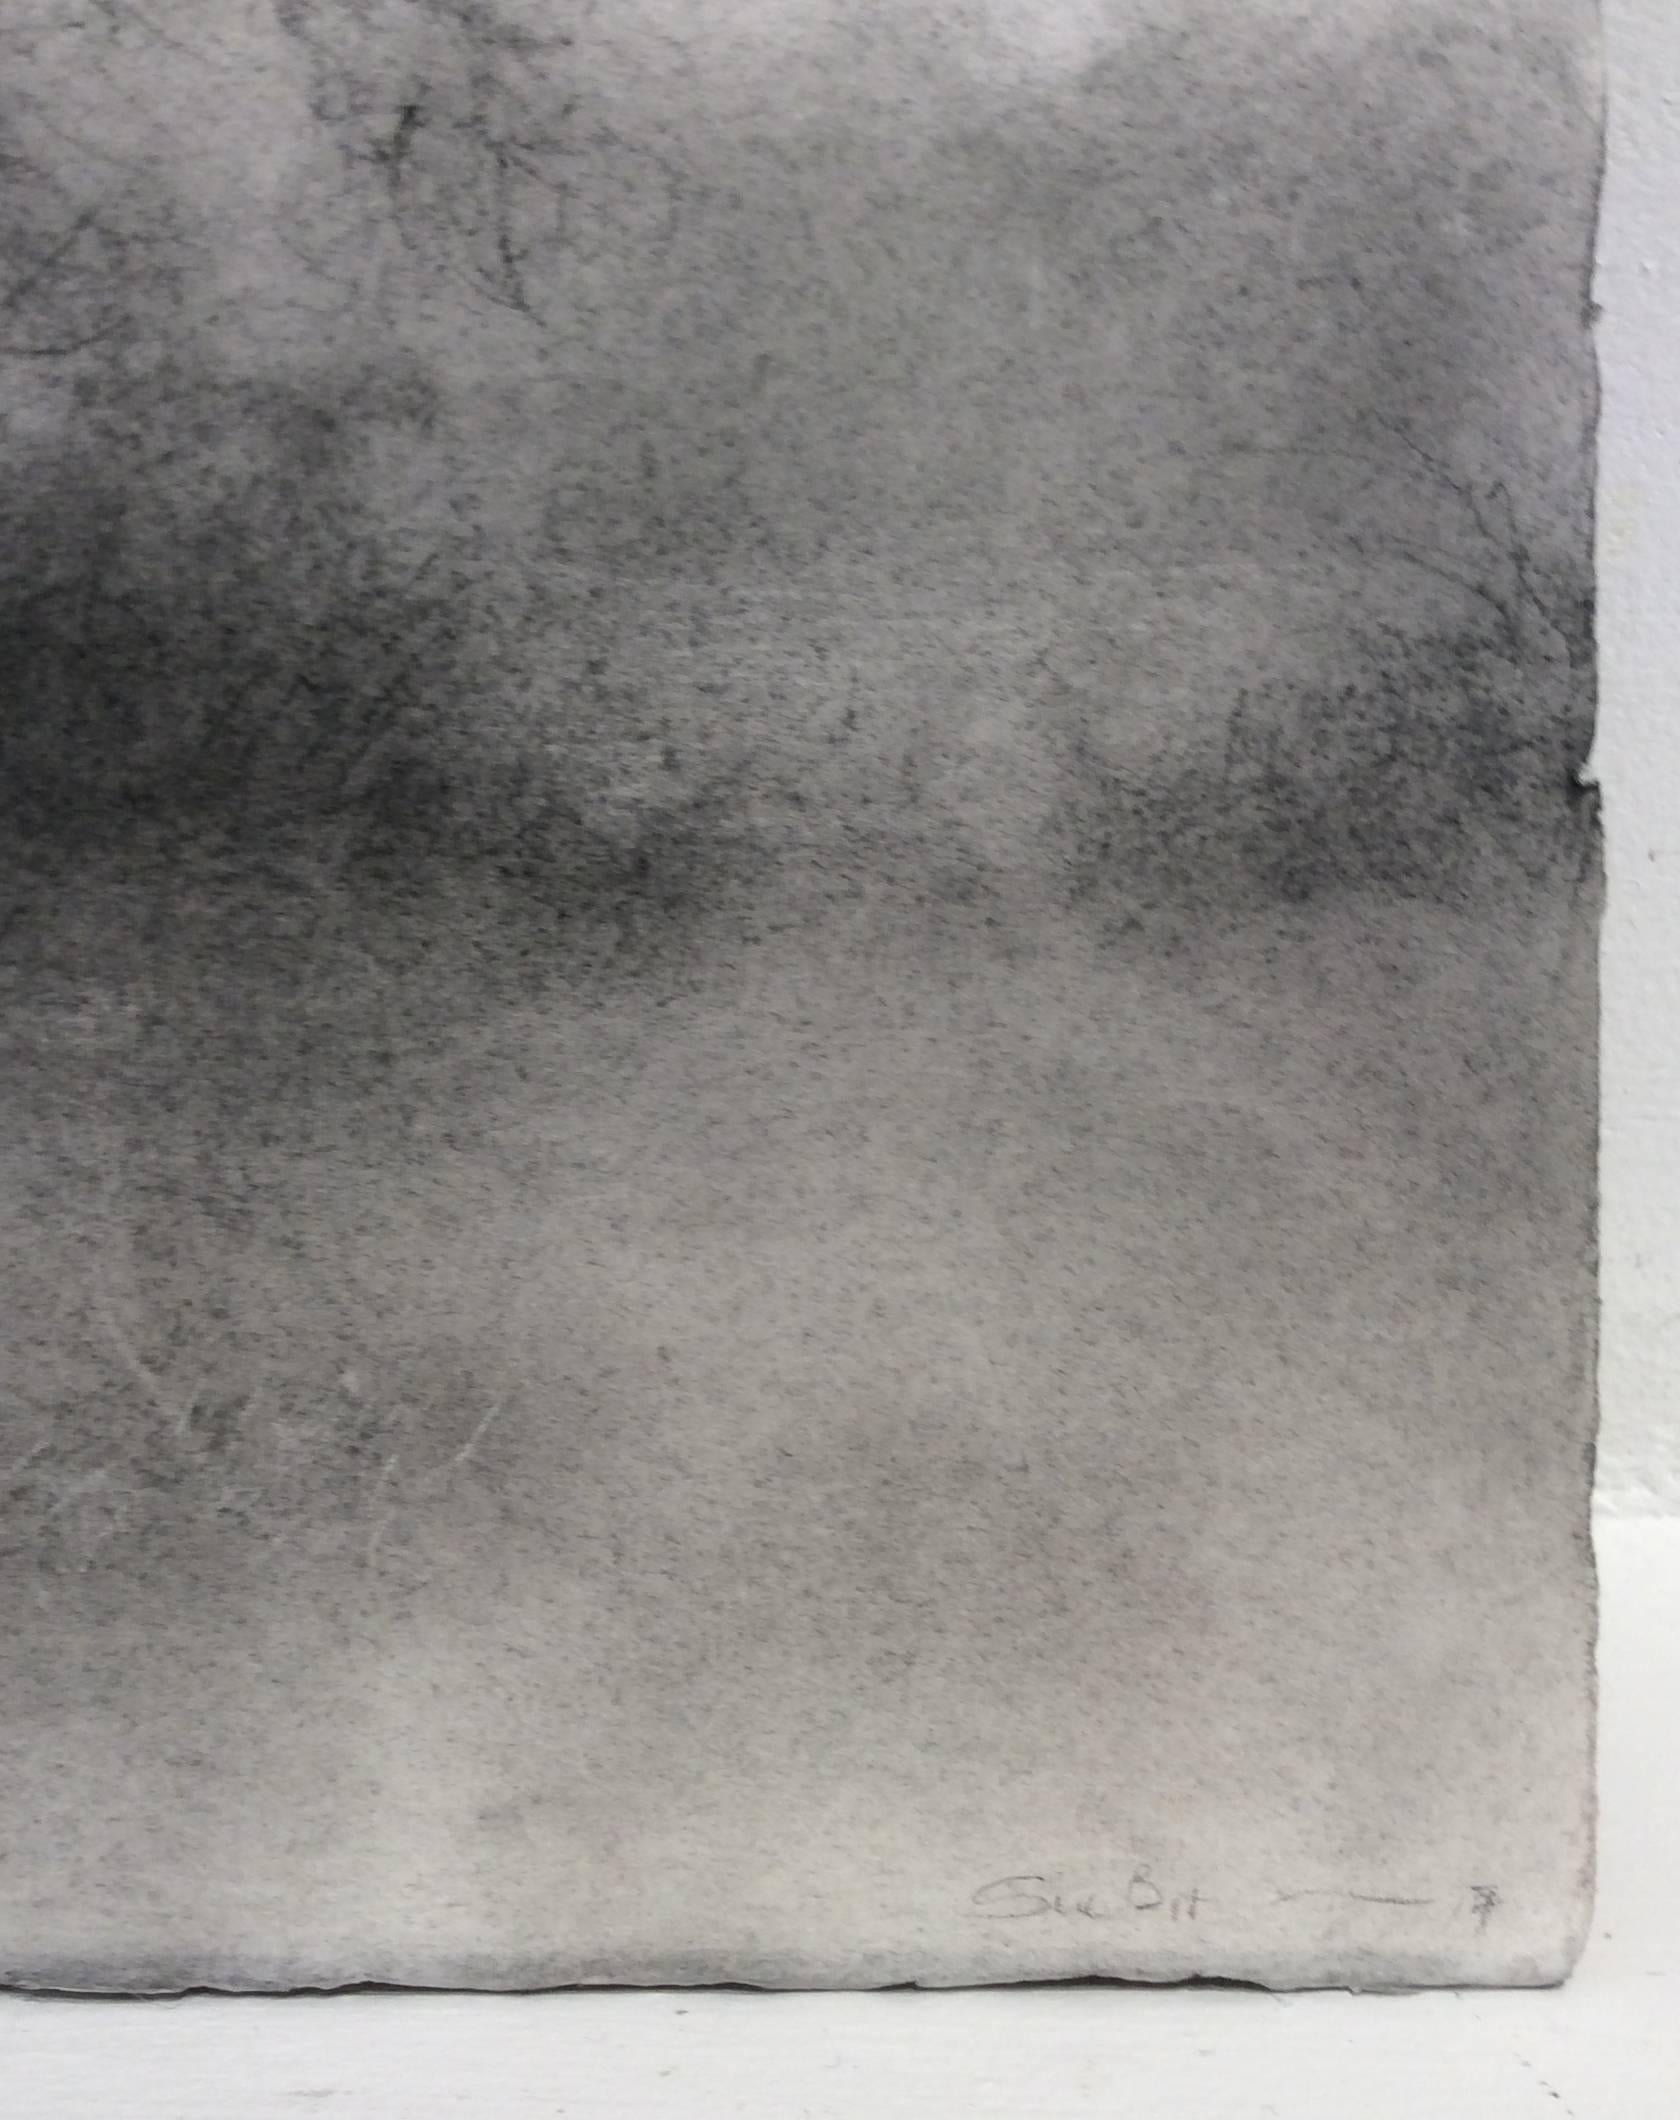 Winter Tree 4 (Black & White Realistic Landscape Charcoal Drawing on Paper) - Gray Landscape Art by Sue Bryan